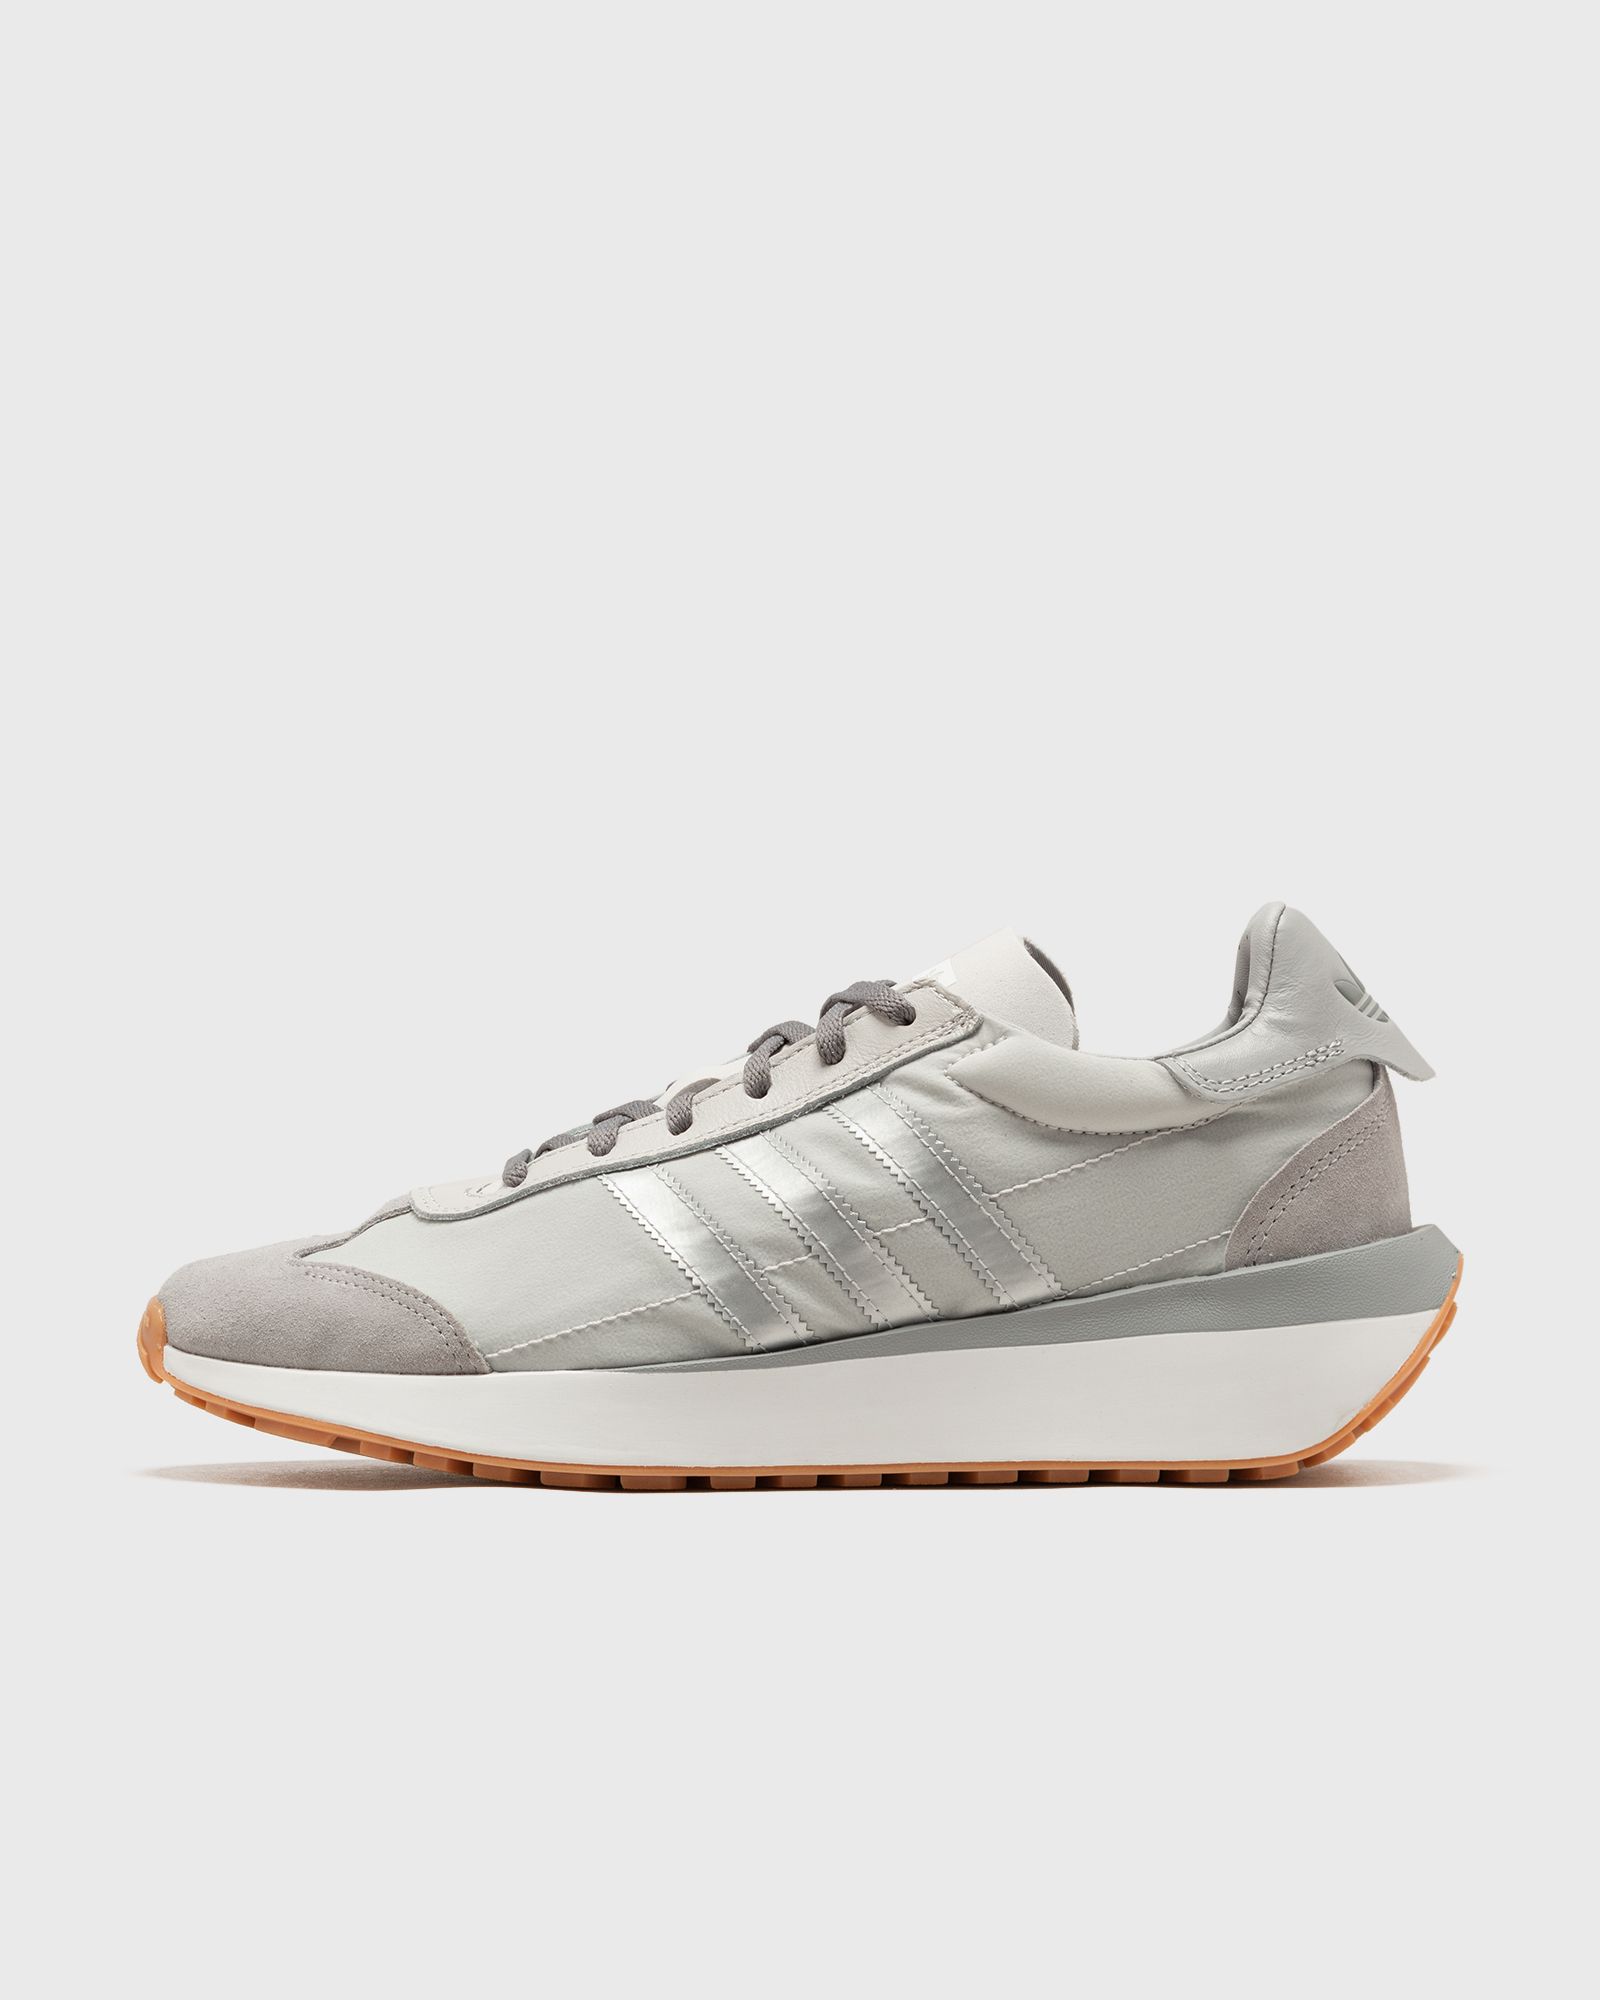 Adidas - country xlg men lowtop grey in größe:44 2/3